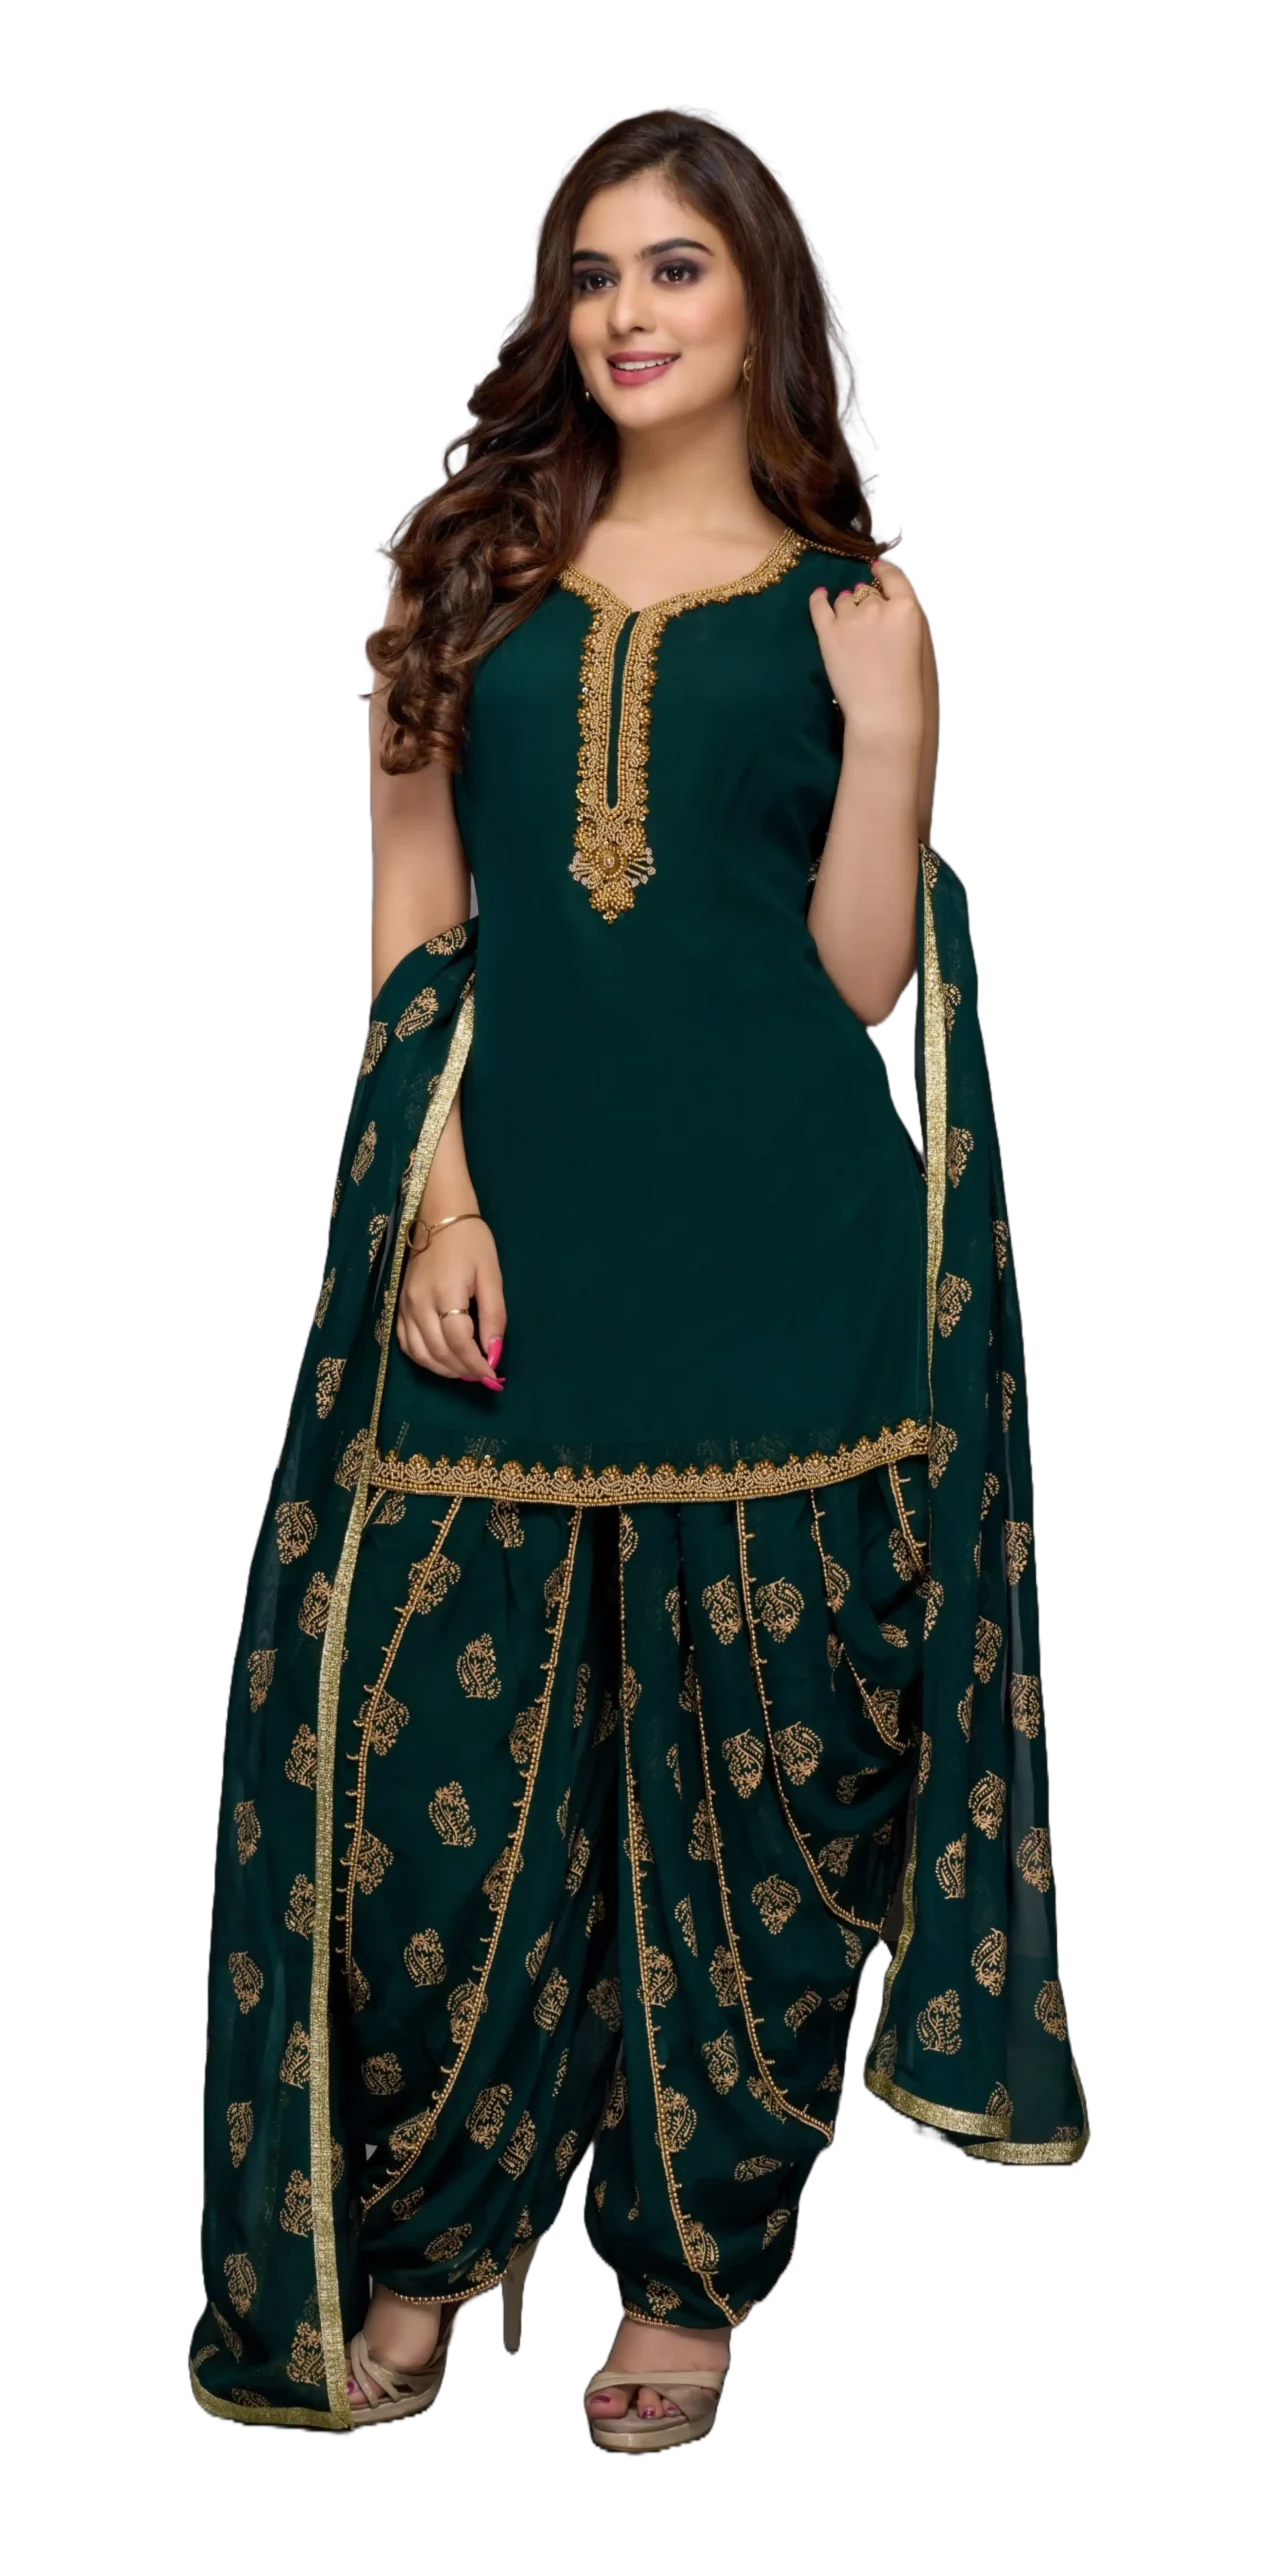 Sharara suit photo poses | Stylish dress designs, Party wear indian  dresses, Indian fashion dresses